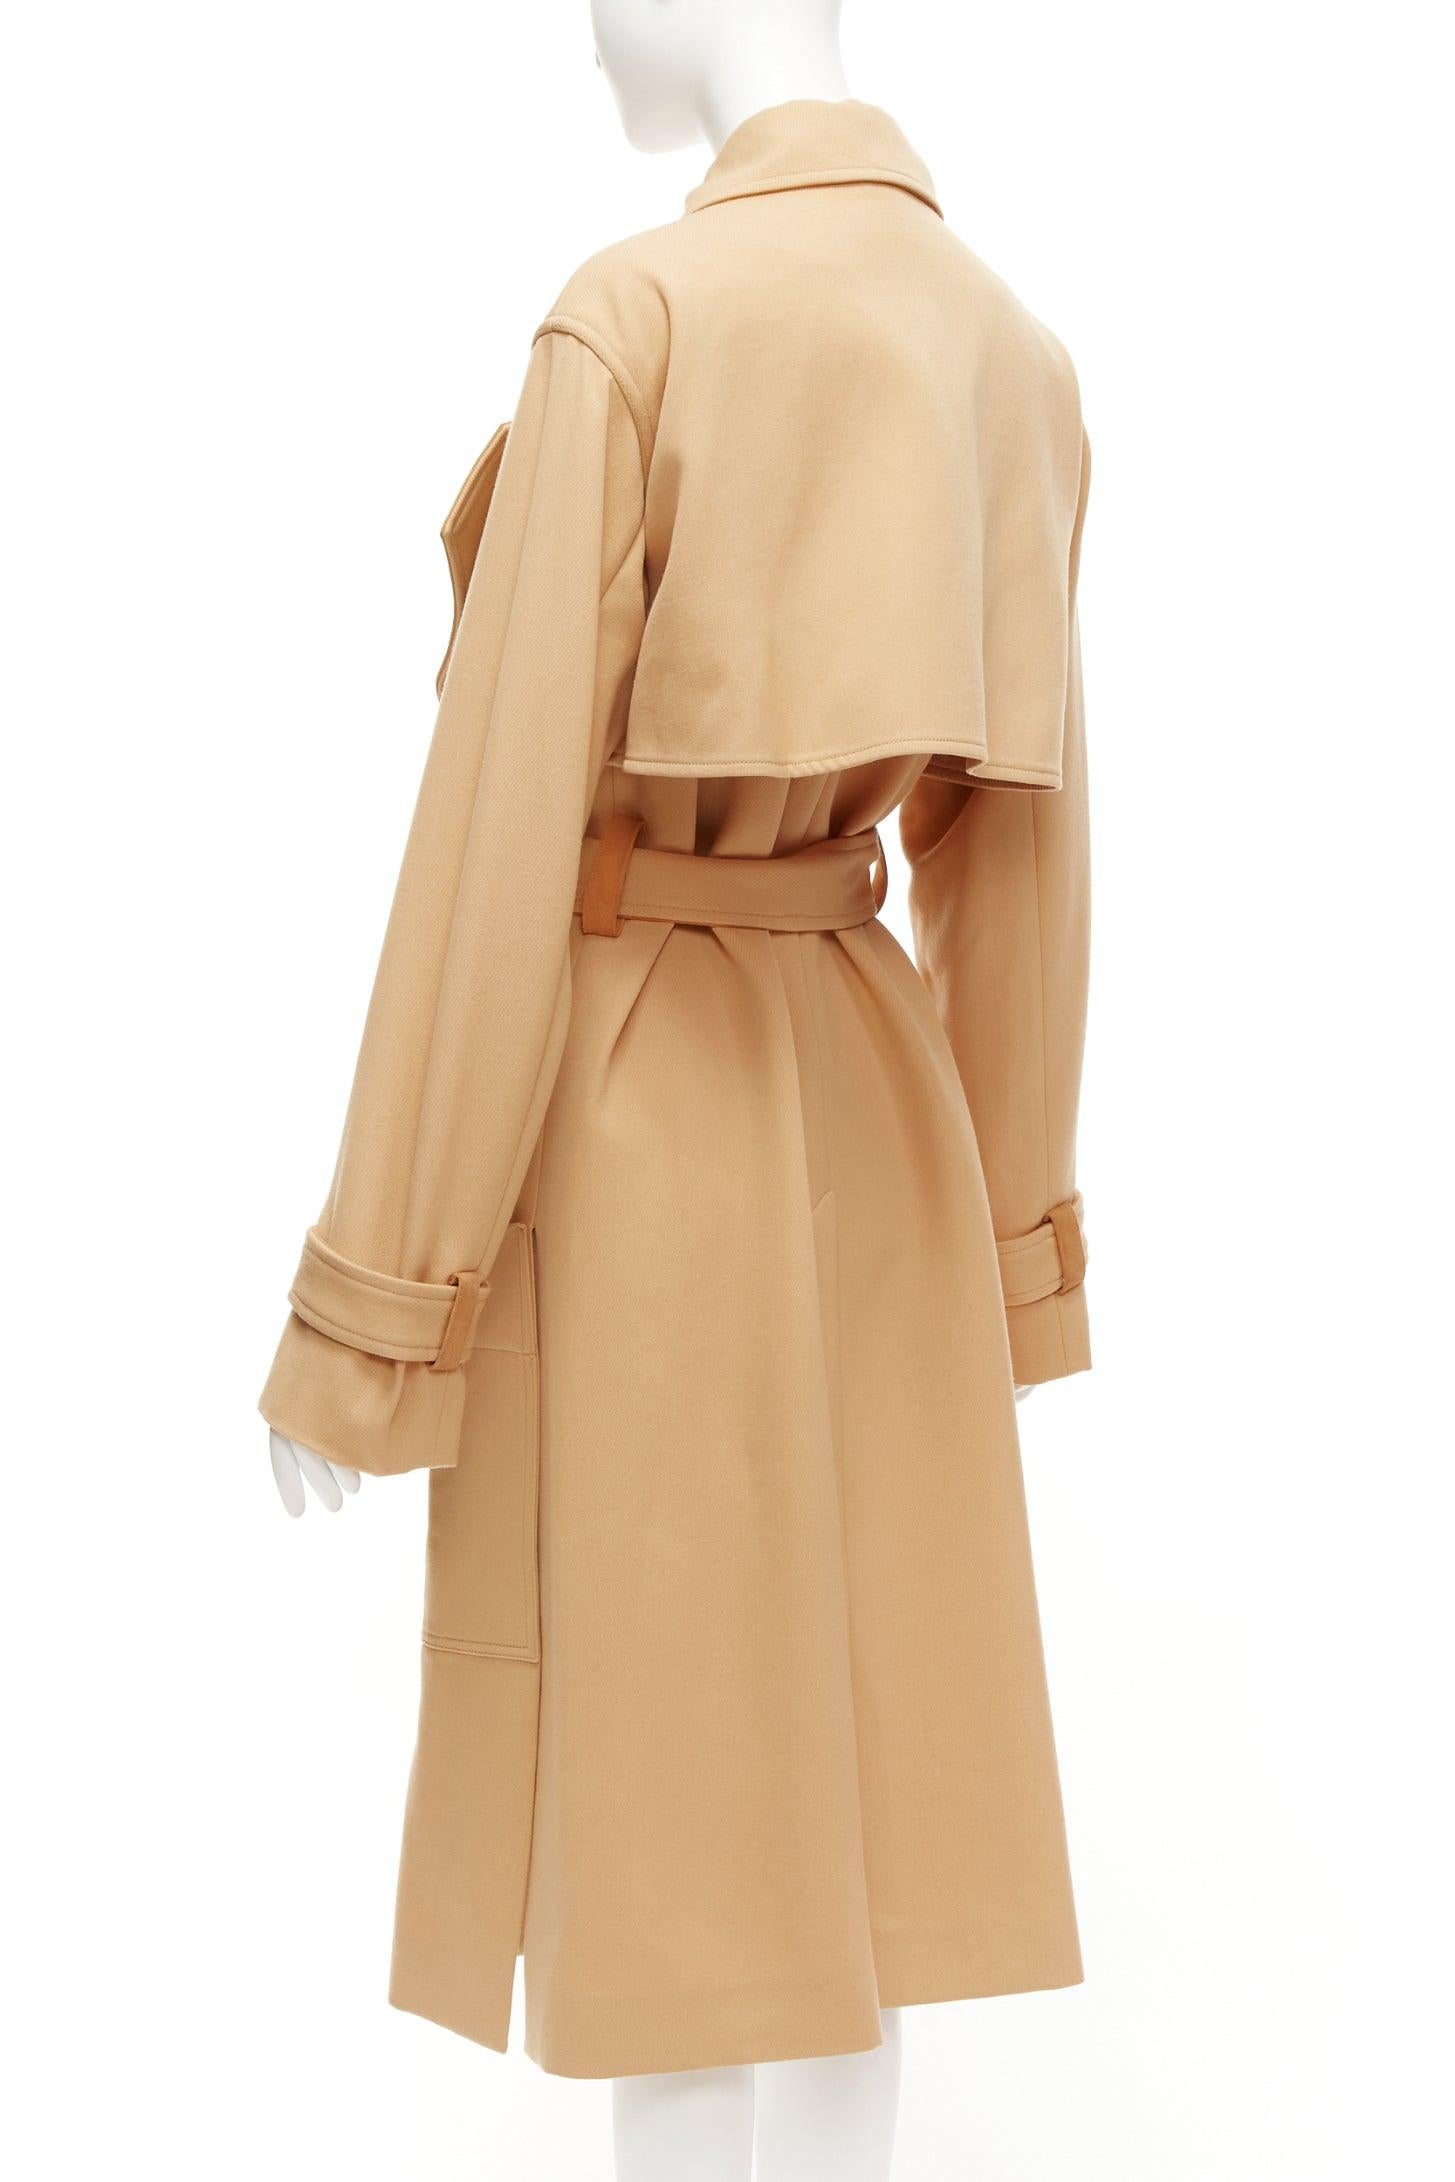 OLD CELINE Phoebe Philo wool goat leather trimmed deconstructed trench coat FR38 For Sale 3